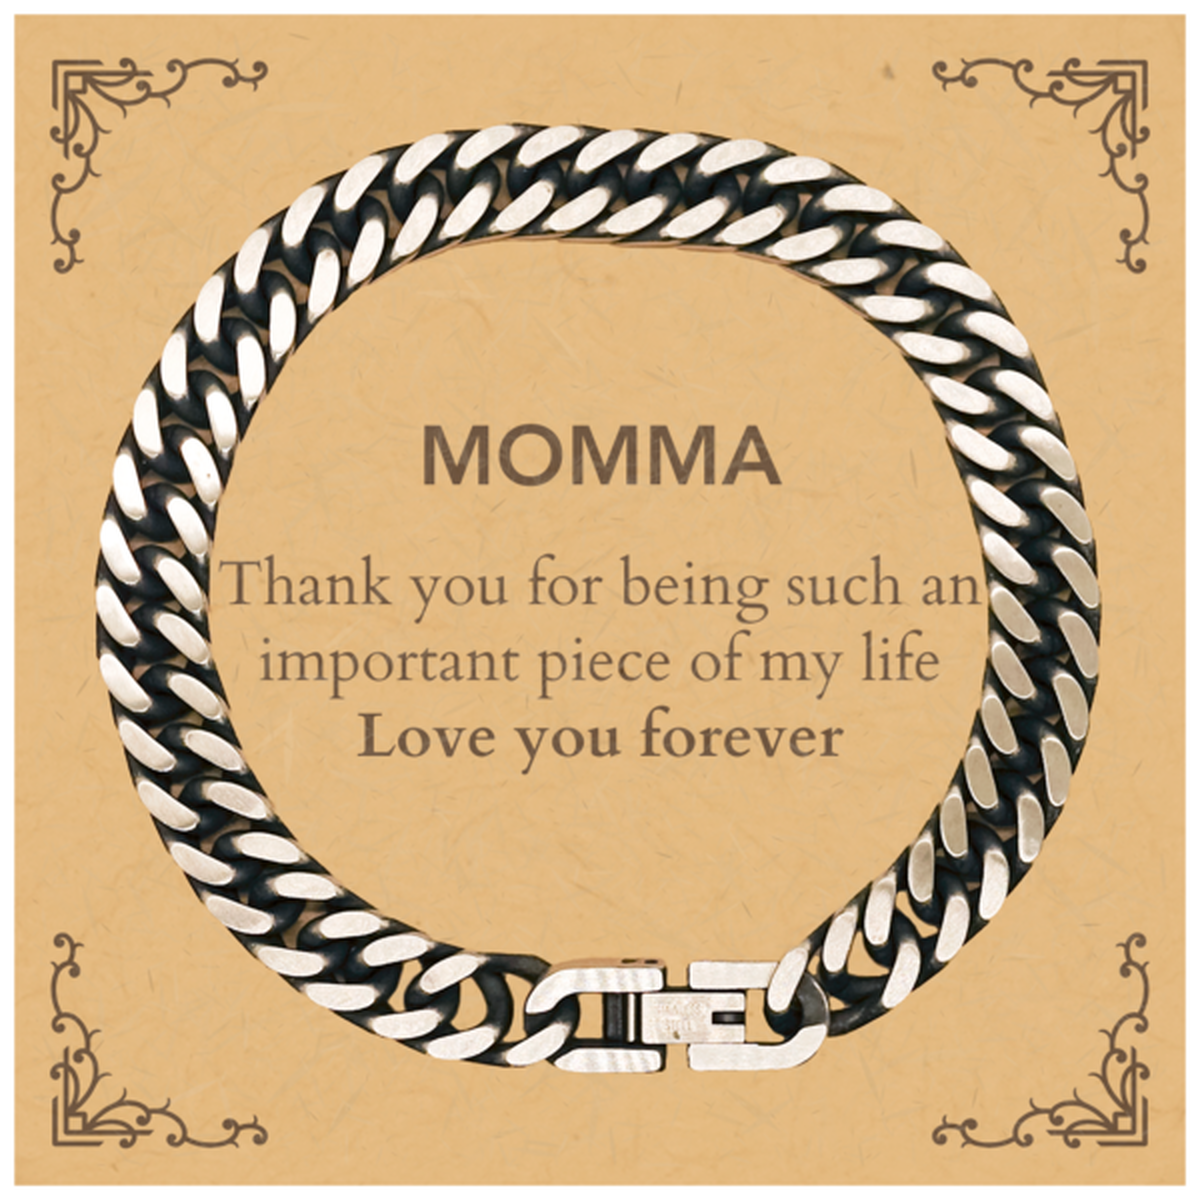 Appropriate Momma Cuban Link Chain Bracelet Epic Birthday Gifts for Momma Thank you for being such an important piece of my life Momma Christmas Mothers Fathers Day